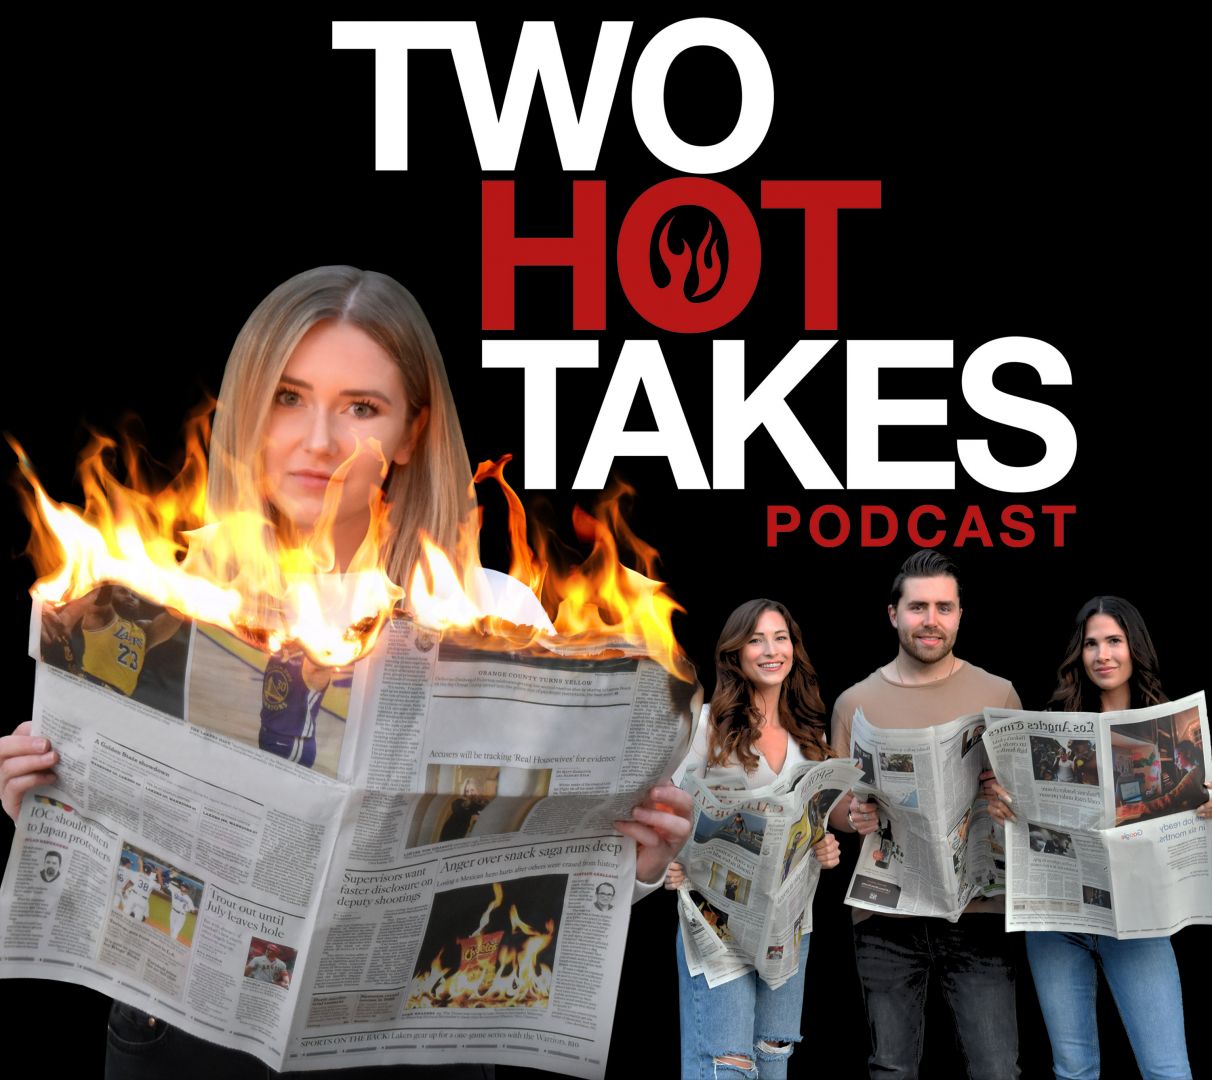 Advertise on Two Hot Takes Podcast with AudioGO